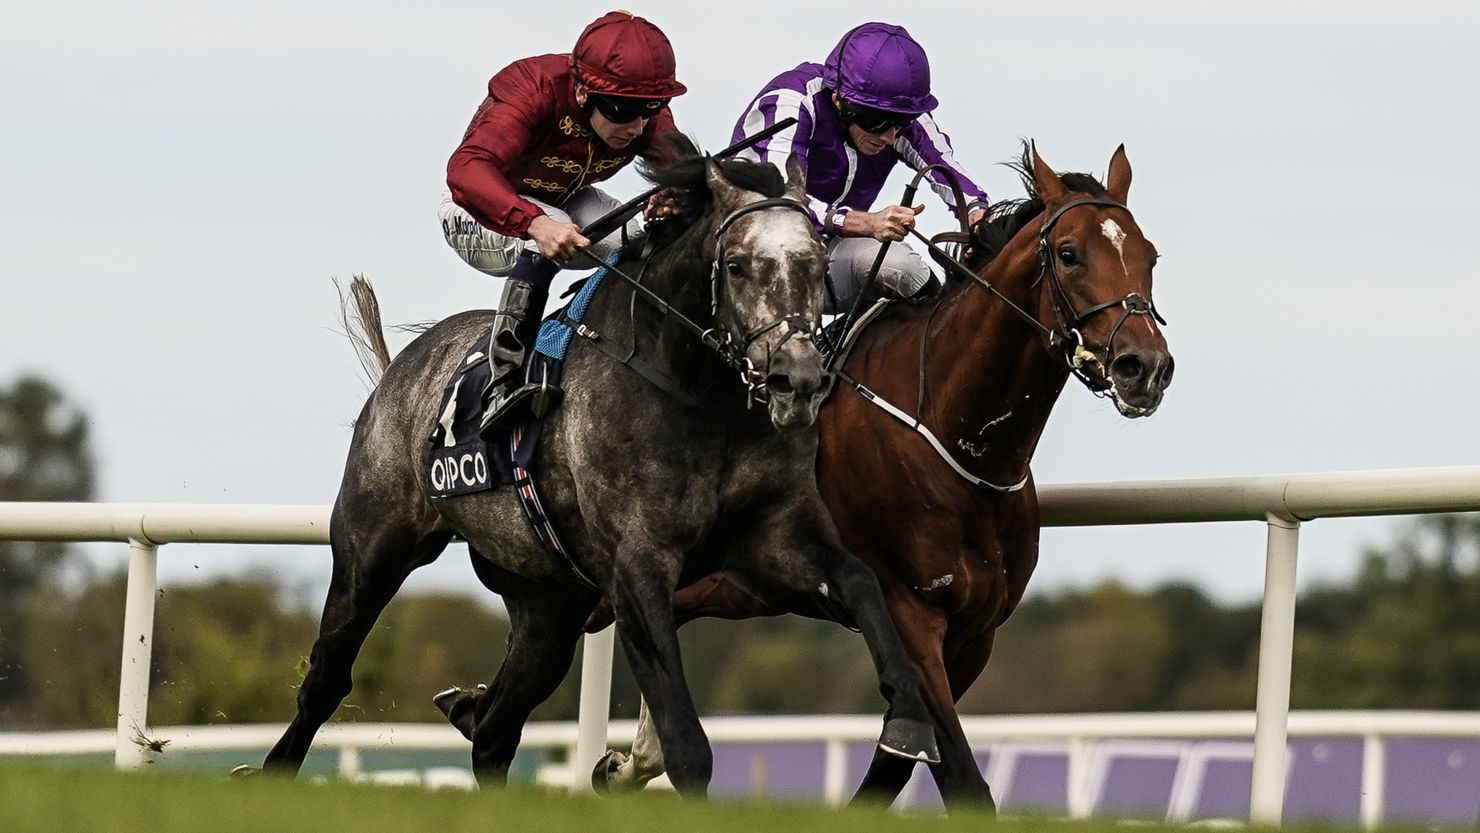 Roaring LIon (left) and Saxon Warrior (right) were neck-to-neck during the Irish Champion Stakes at Leopardstown on Saturday.